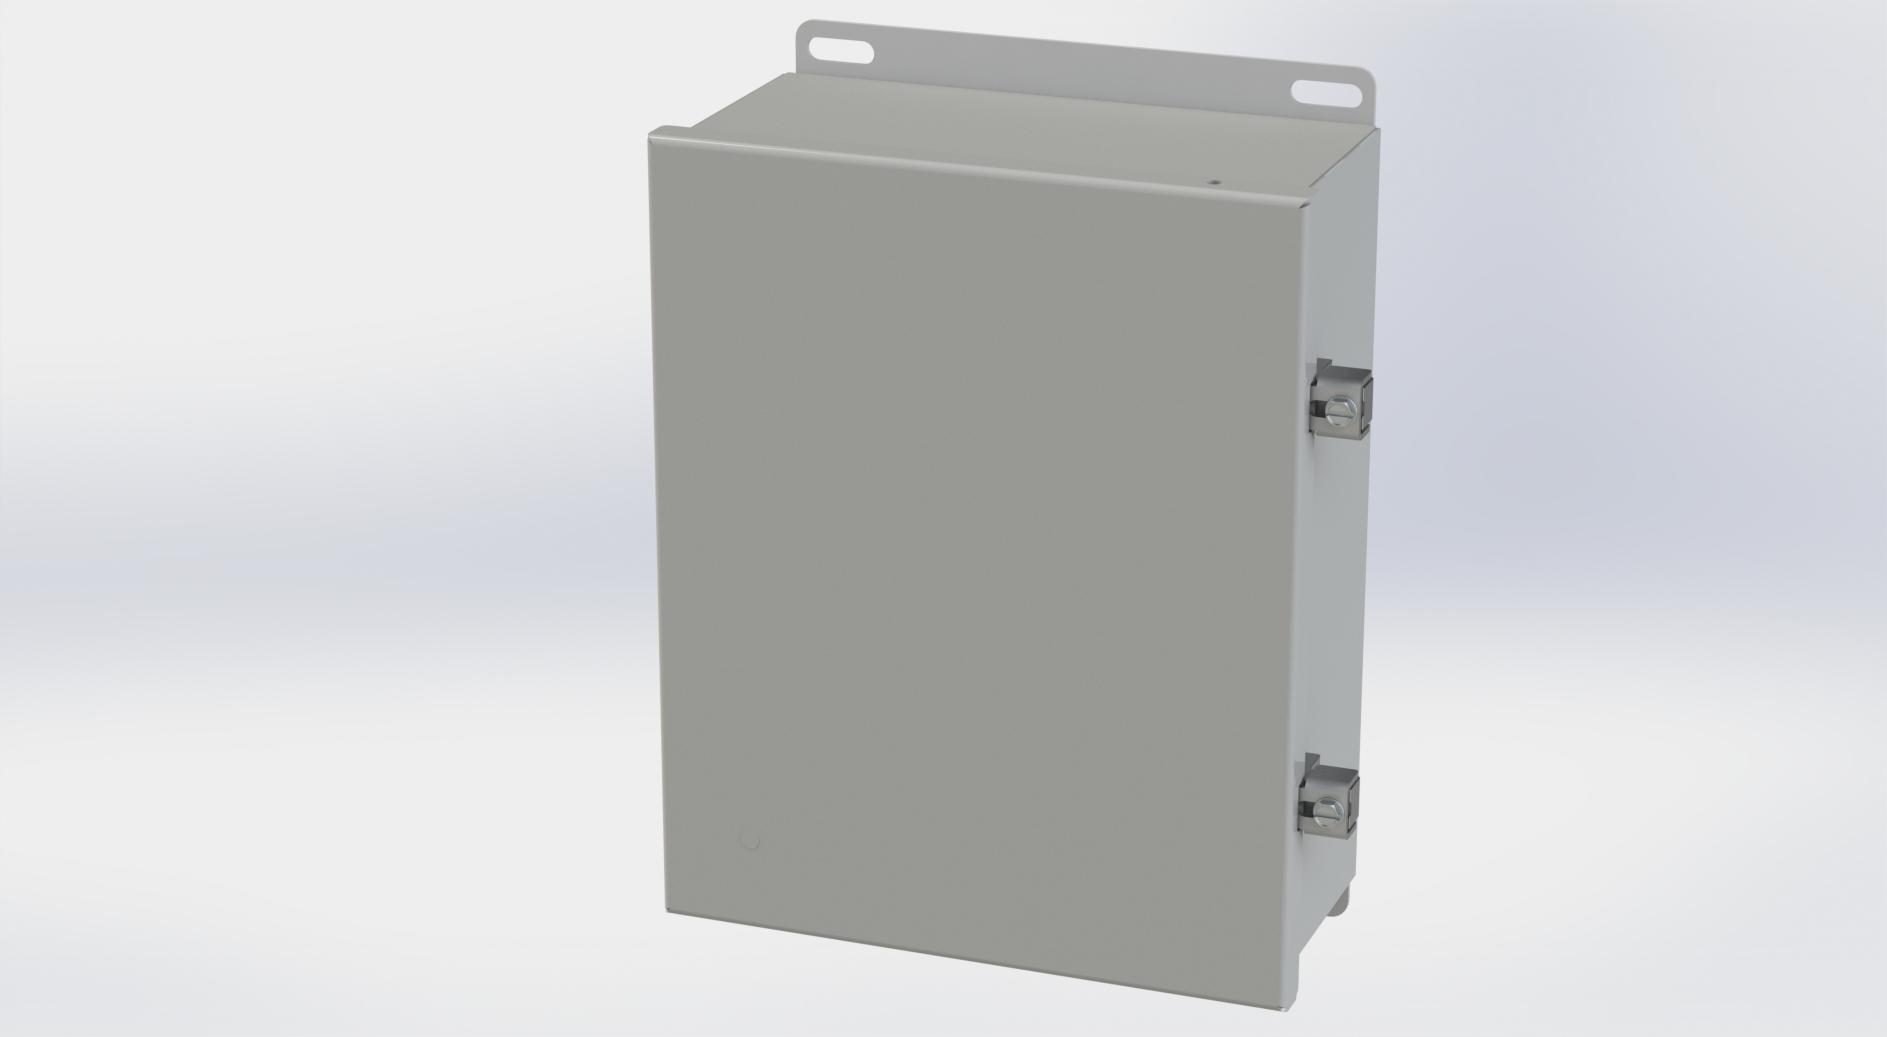 Saginaw Control SCE-1008CHNF CHNF Enclosure, Height:10.13", Width:8.00", Depth:4.00", ANSI-61 gray powder coating inside and out. Optional sub-panels are powder coated white.